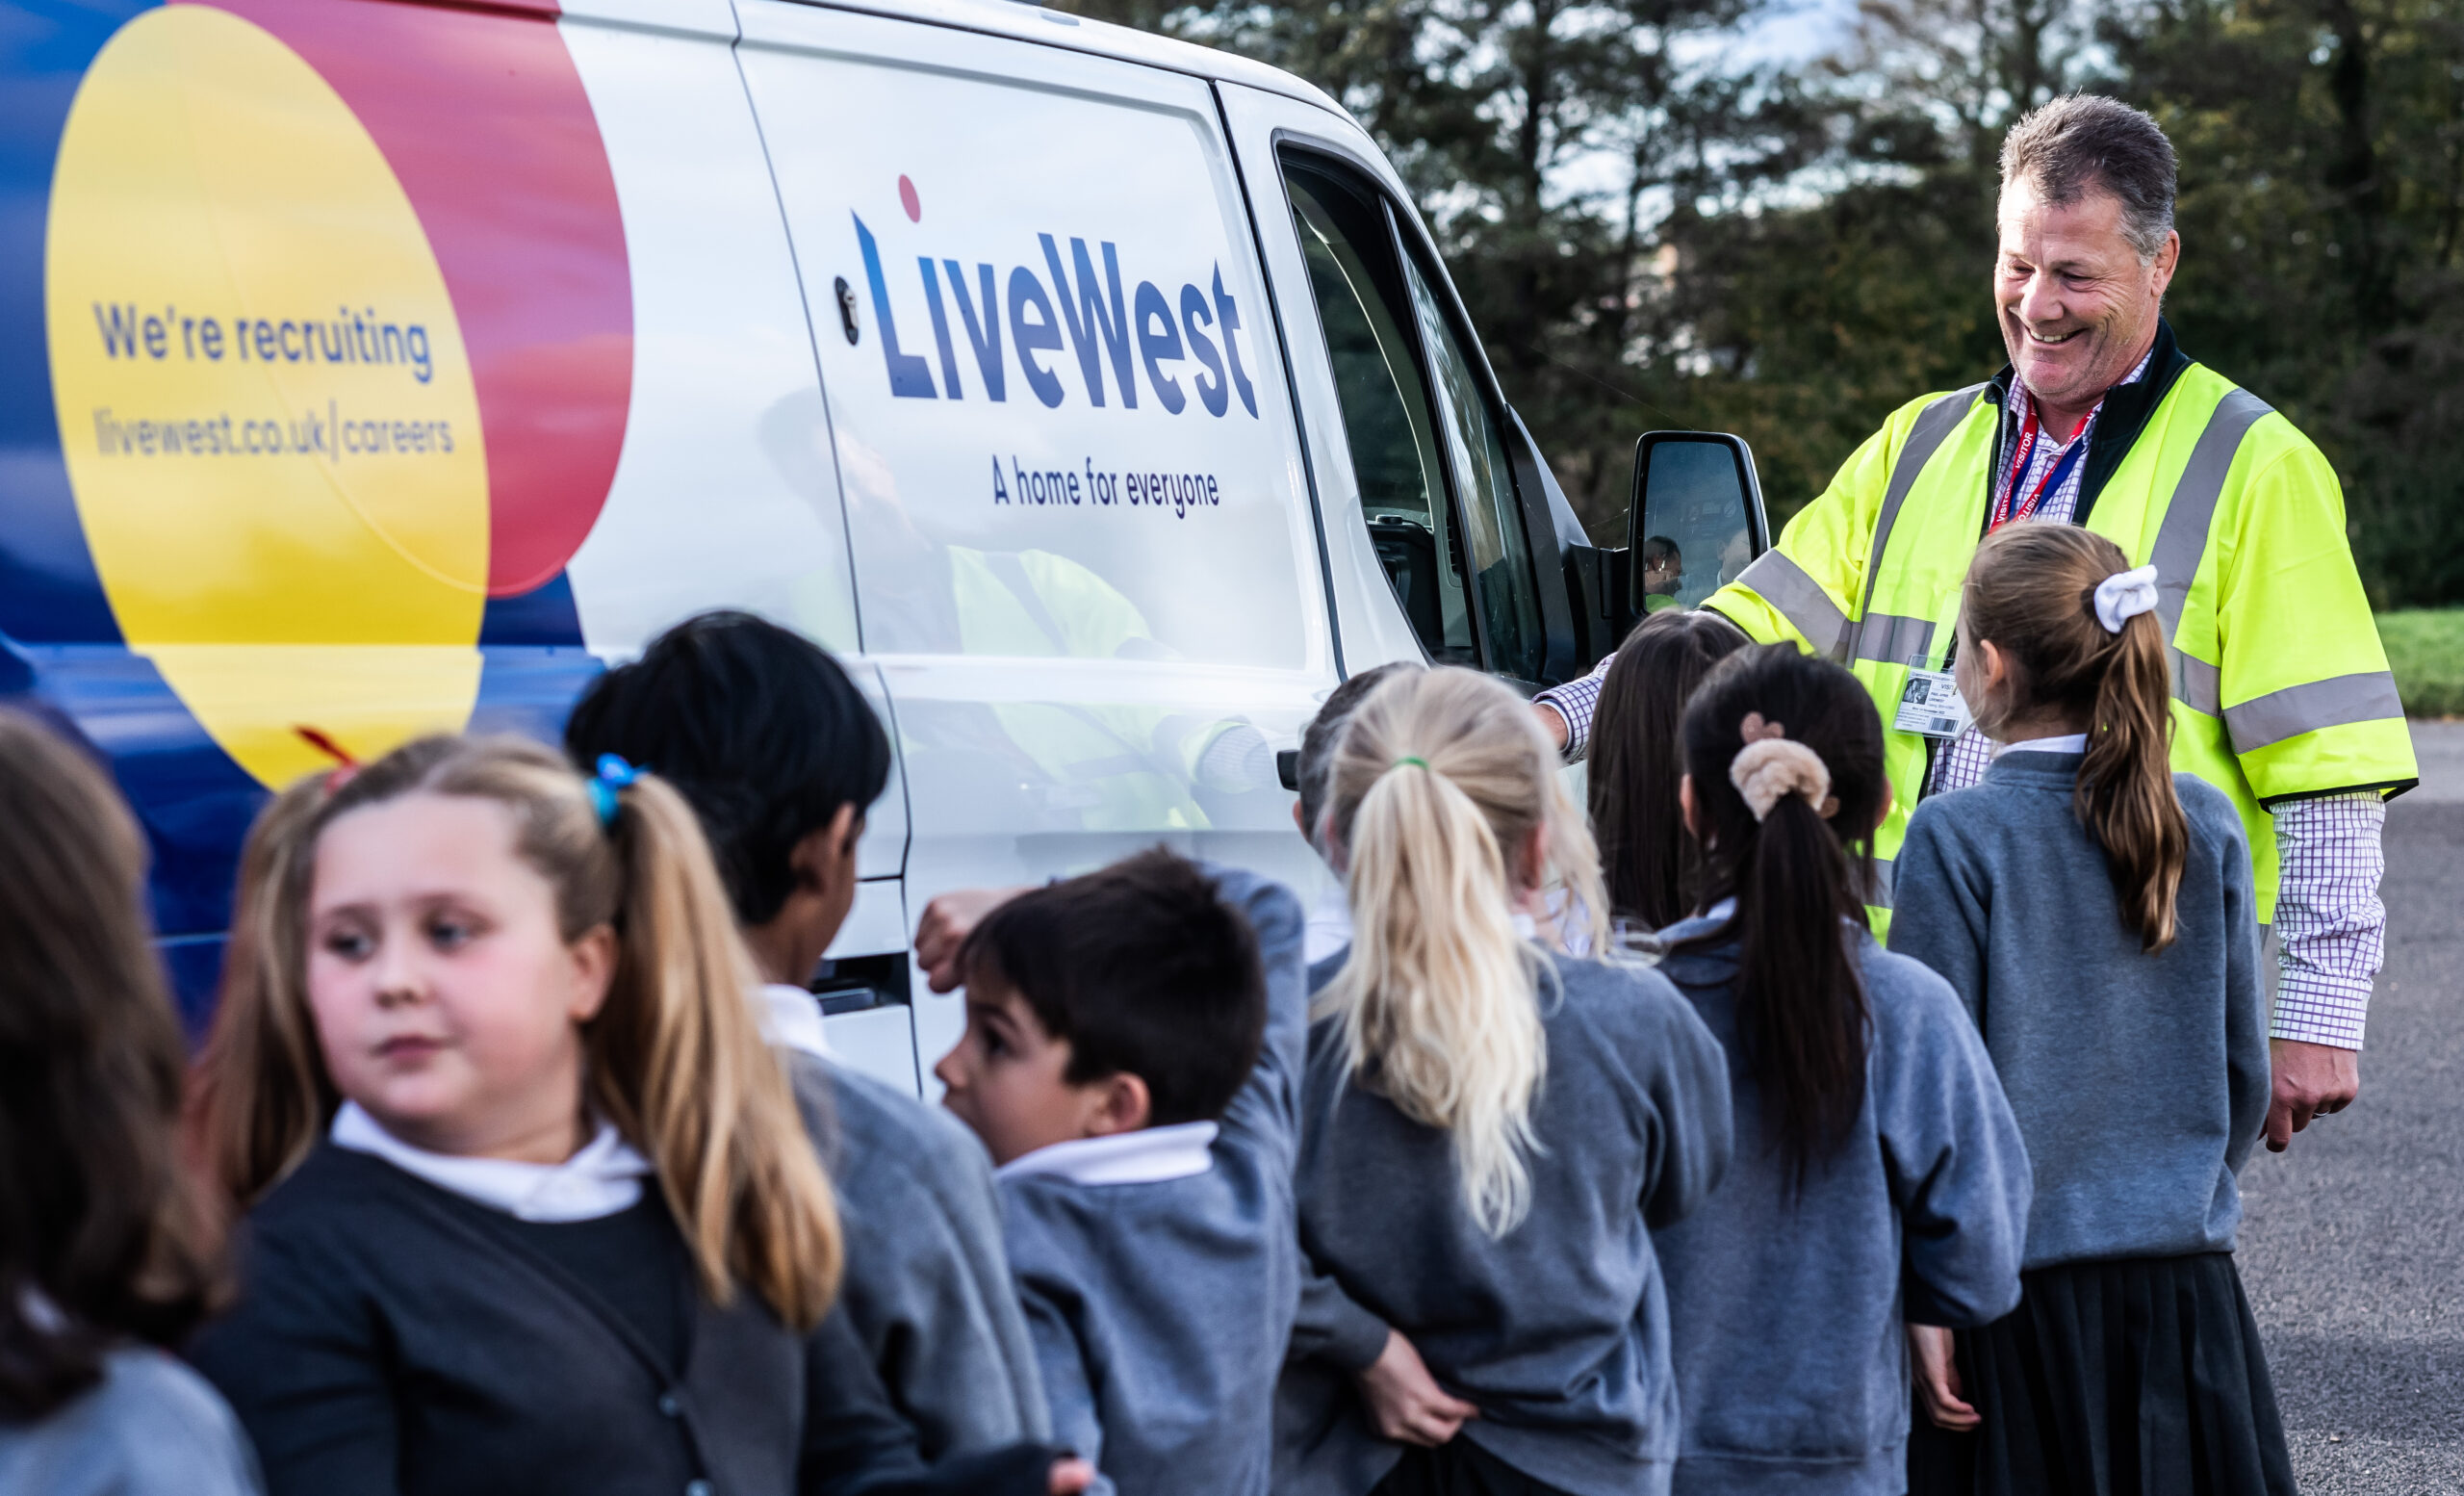 Fleet Service GB, LiveWest and Cranbrook Education Campus mark Road Safety Week